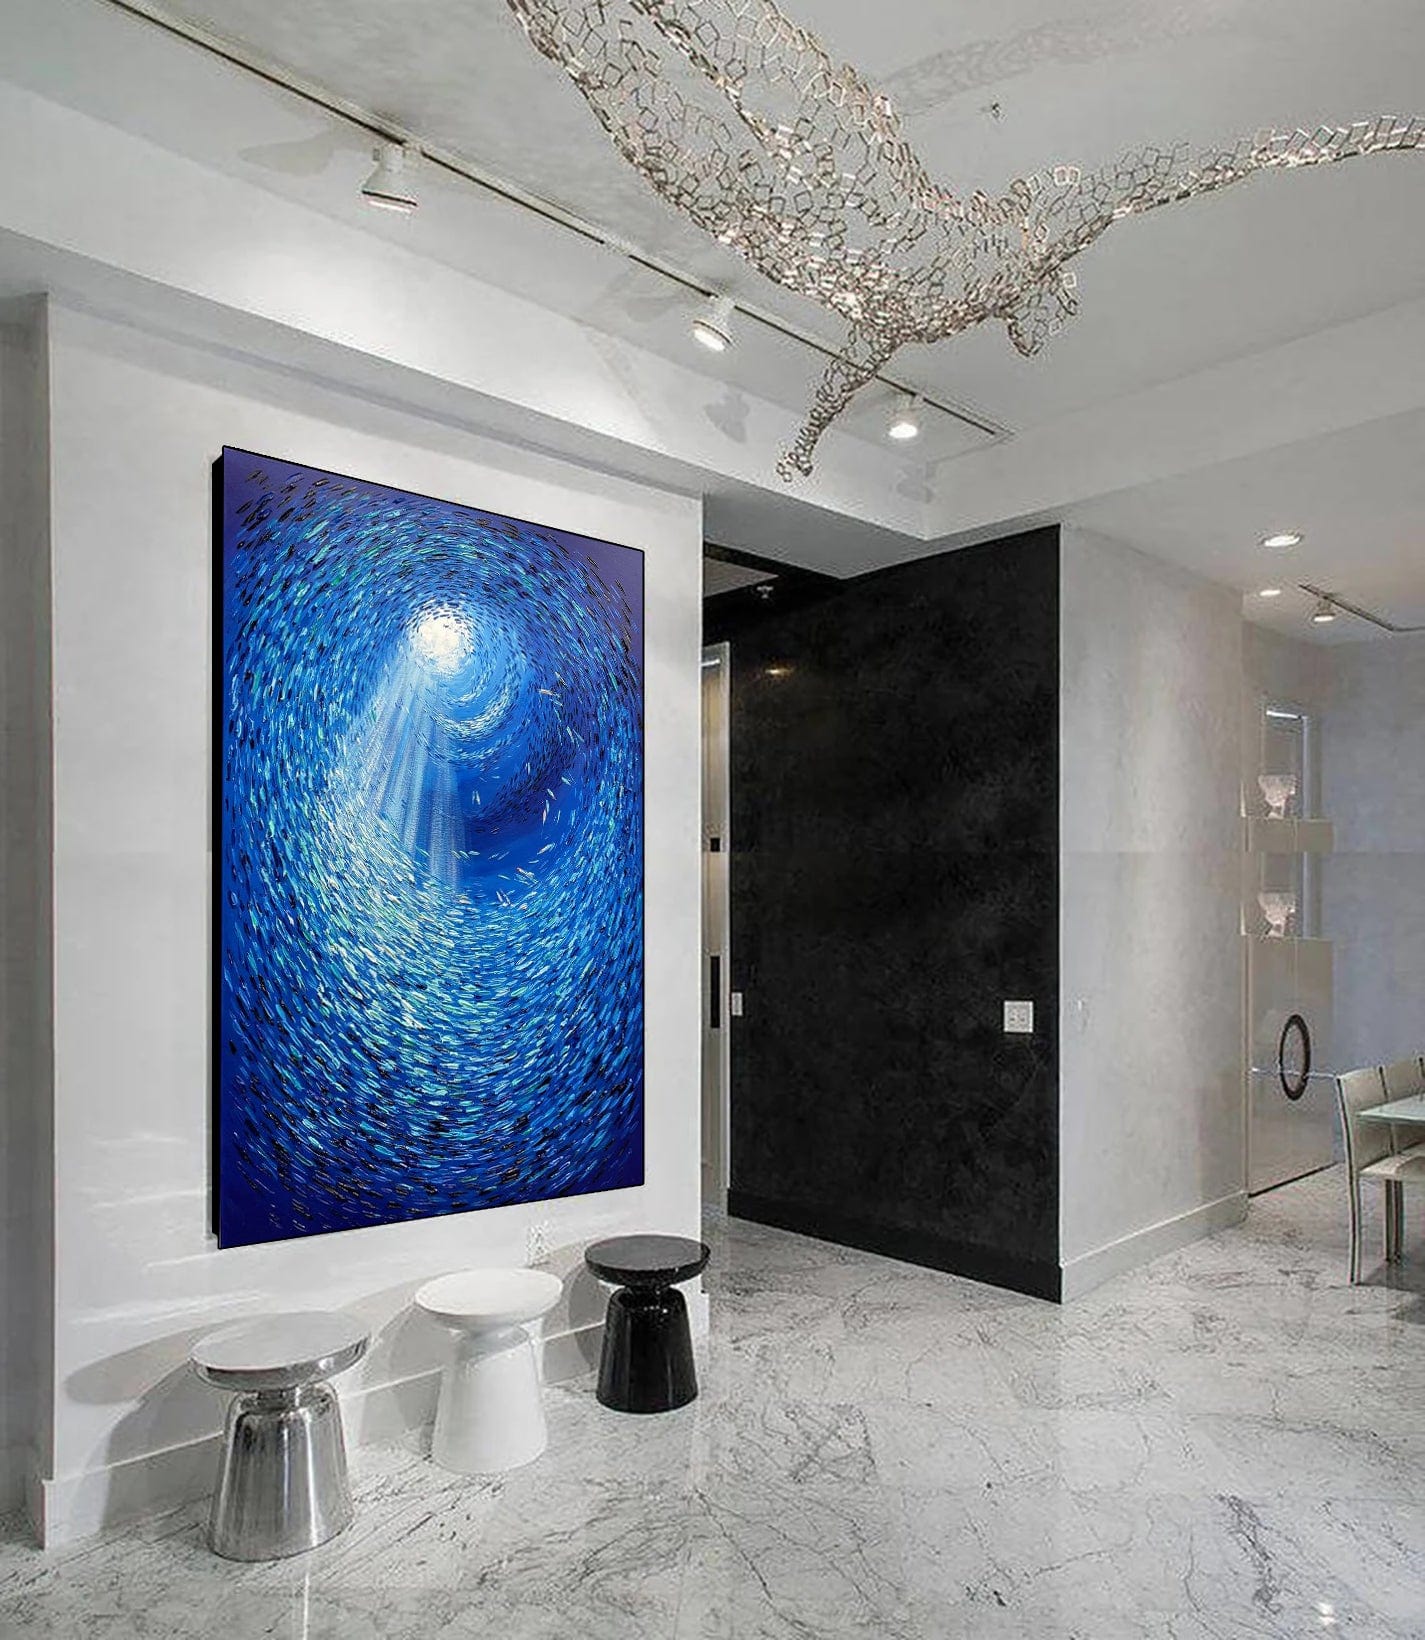 FISH WHIRLPOOL from $310